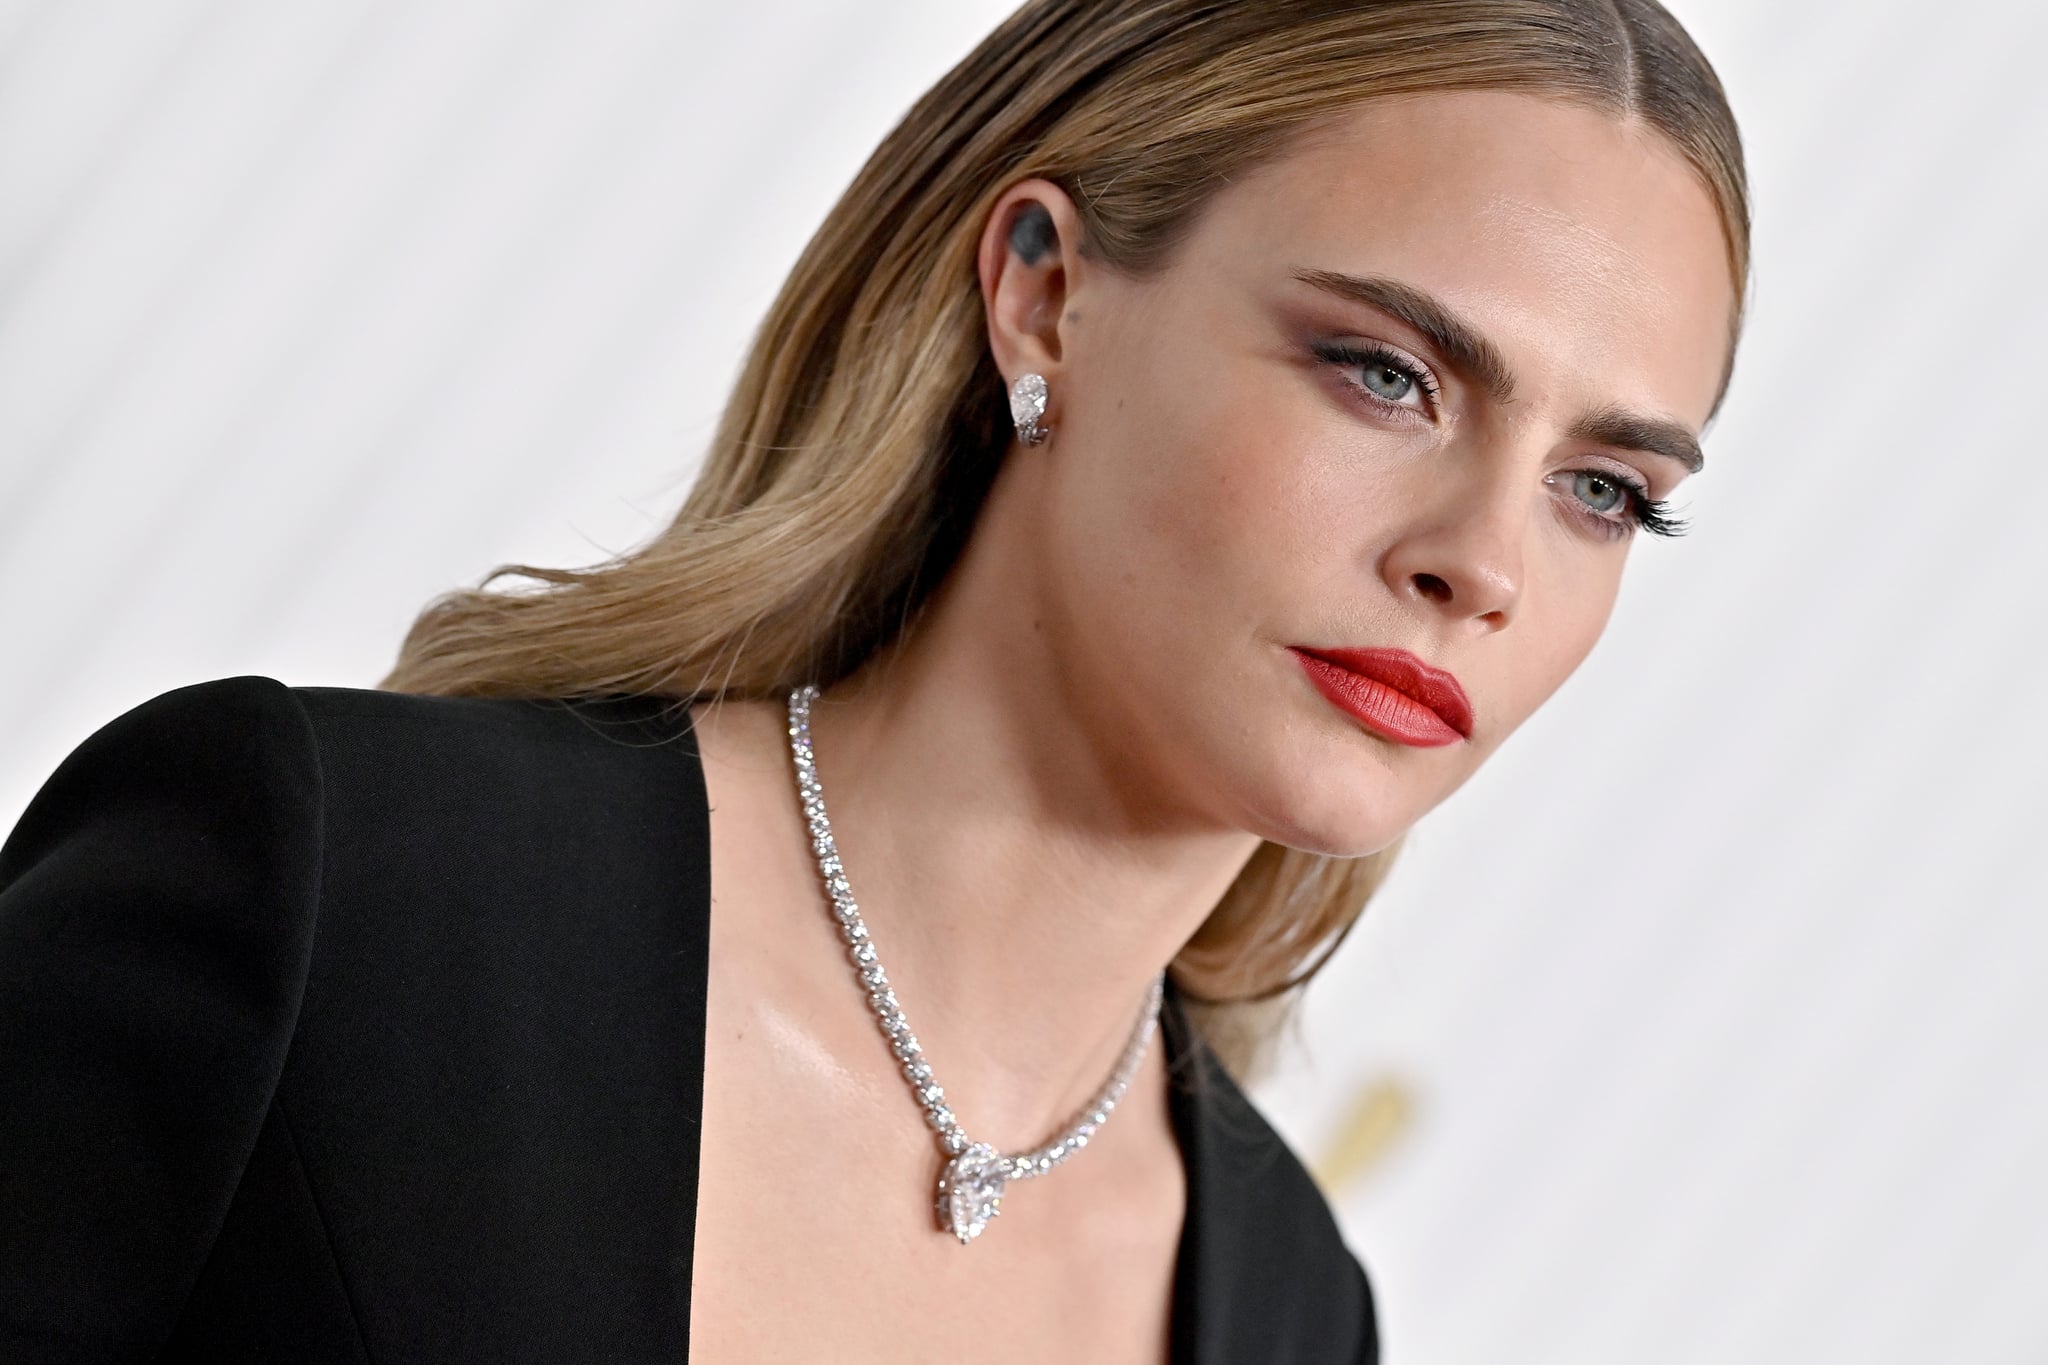 LOS ANGELES, CALIFORNIA - FEBRUARY 26: Cara Delevingne attends the 29th Annual Screen Actors Guild Awards at Fairmont Century Plaza on February 26, 2023 in Los Angeles, California. (Photo by Axelle/Bauer-Griffin/FilmMagic)